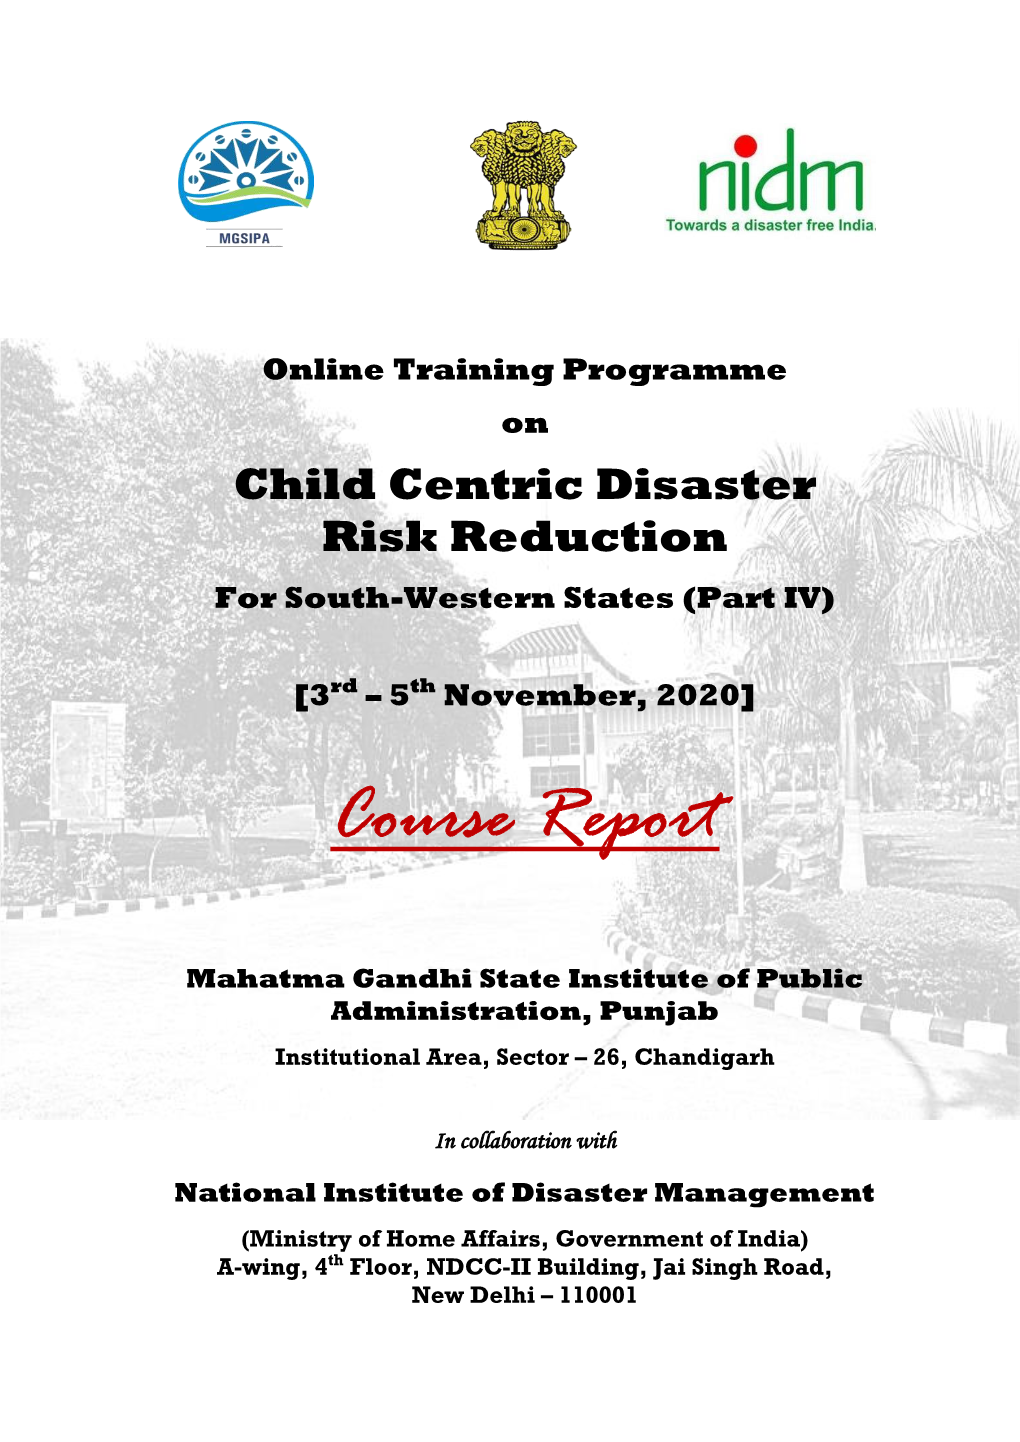 Child Centric Disaster Risk Reduction for South-Western States (Part IV)